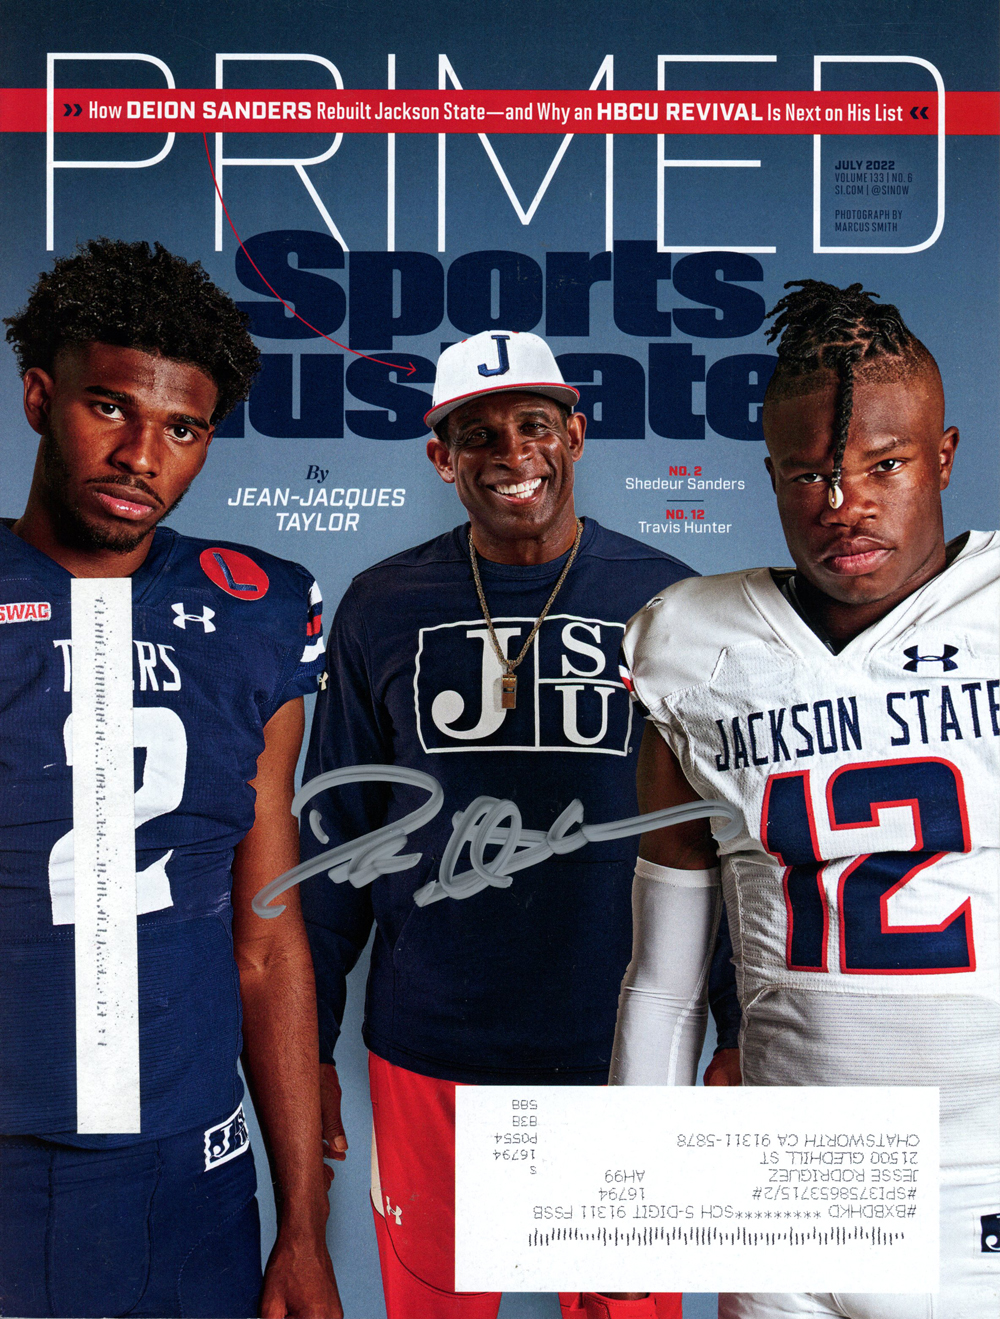 jackson sports illustrated cover